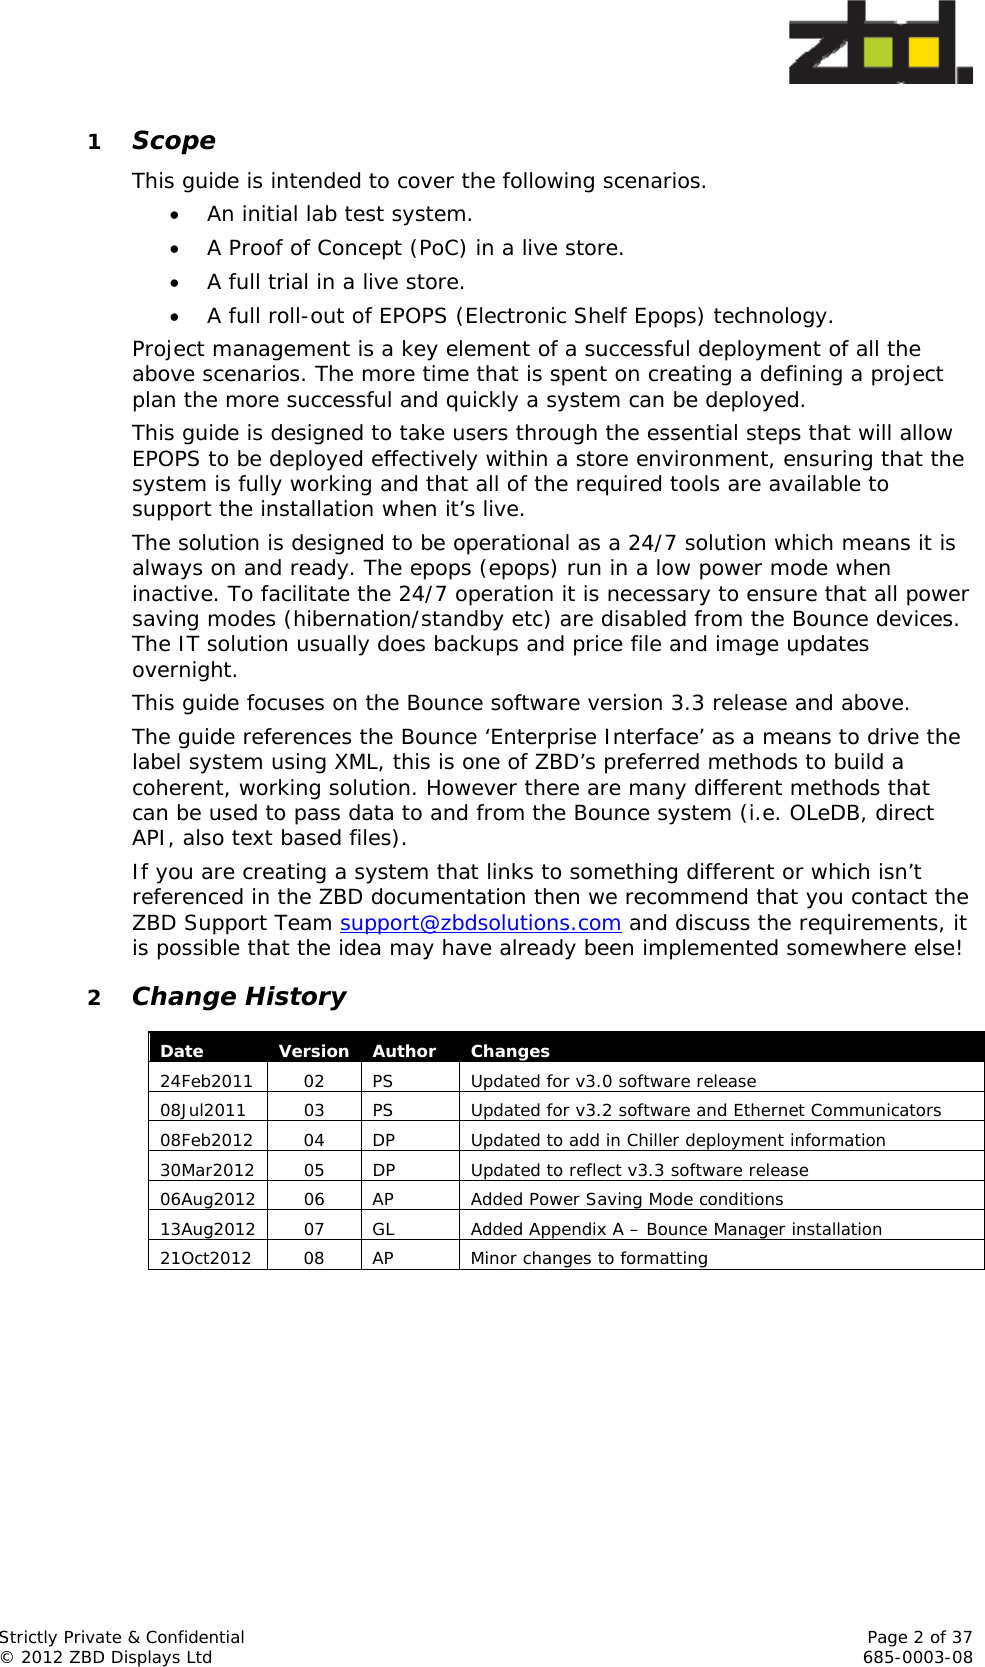  Strictly Private &amp; Confidential    Page 2 of 37 © 2012 ZBD Displays Ltd     685-0003-08 1 Scope This guide is intended to cover the following scenarios.  An initial lab test system.  A Proof of Concept (PoC) in a live store.  A full trial in a live store.  A full roll-out of EPOPS (Electronic Shelf Epops) technology. Project management is a key element of a successful deployment of all the above scenarios. The more time that is spent on creating a defining a project plan the more successful and quickly a system can be deployed. This guide is designed to take users through the essential steps that will allow EPOPS to be deployed effectively within a store environment, ensuring that the system is fully working and that all of the required tools are available to support the installation when it’s live. The solution is designed to be operational as a 24/7 solution which means it is always on and ready. The epops (epops) run in a low power mode when inactive. To facilitate the 24/7 operation it is necessary to ensure that all power saving modes (hibernation/standby etc) are disabled from the Bounce devices. The IT solution usually does backups and price file and image updates overnight. This guide focuses on the Bounce software version 3.3 release and above.  The guide references the Bounce ‘Enterprise Interface’ as a means to drive the label system using XML, this is one of ZBD’s preferred methods to build a coherent, working solution. However there are many different methods that can be used to pass data to and from the Bounce system (i.e. OLeDB, direct API, also text based files).  If you are creating a system that links to something different or which isn’t referenced in the ZBD documentation then we recommend that you contact the ZBD Support Team support@zbdsolutions.com and discuss the requirements, it is possible that the idea may have already been implemented somewhere else! 2 Change History       Date  Version Author  Changes 24Feb2011  02  PS  Updated for v3.0 software release 08Jul2011  03  PS  Updated for v3.2 software and Ethernet Communicators 08Feb2012  04  DP  Updated to add in Chiller deployment information 30Mar2012  05  DP  Updated to reflect v3.3 software release 06Aug2012  06  AP  Added Power Saving Mode conditions 13Aug2012  07  GL  Added Appendix A – Bounce Manager installation 21Oct2012  08  AP  Minor changes to formatting 